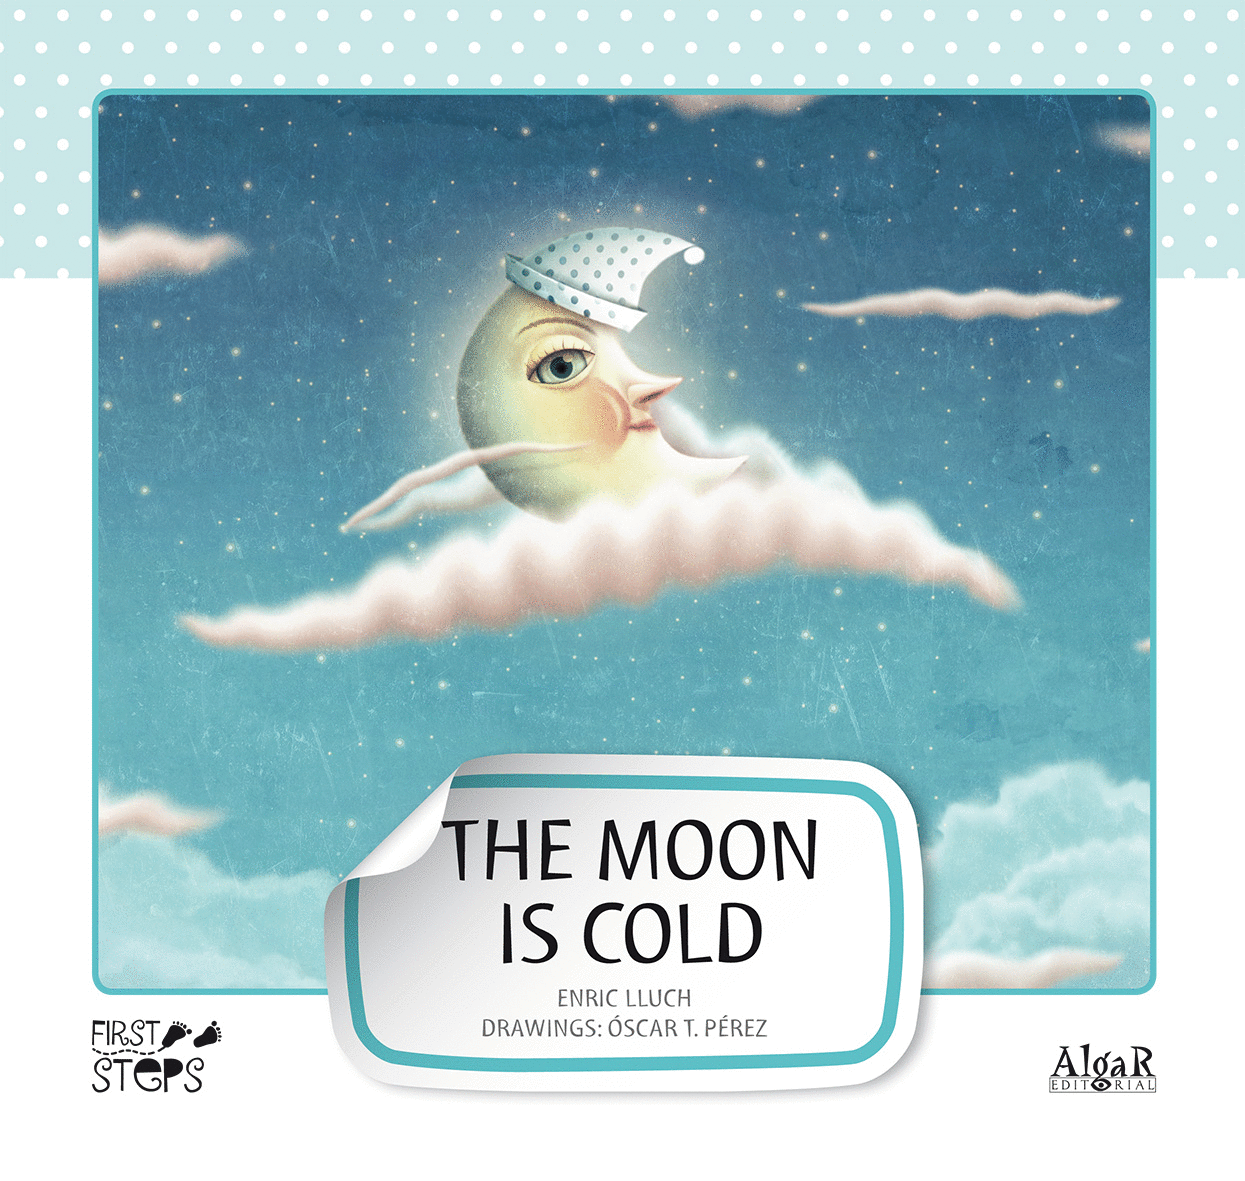 THE MOON IS COLD